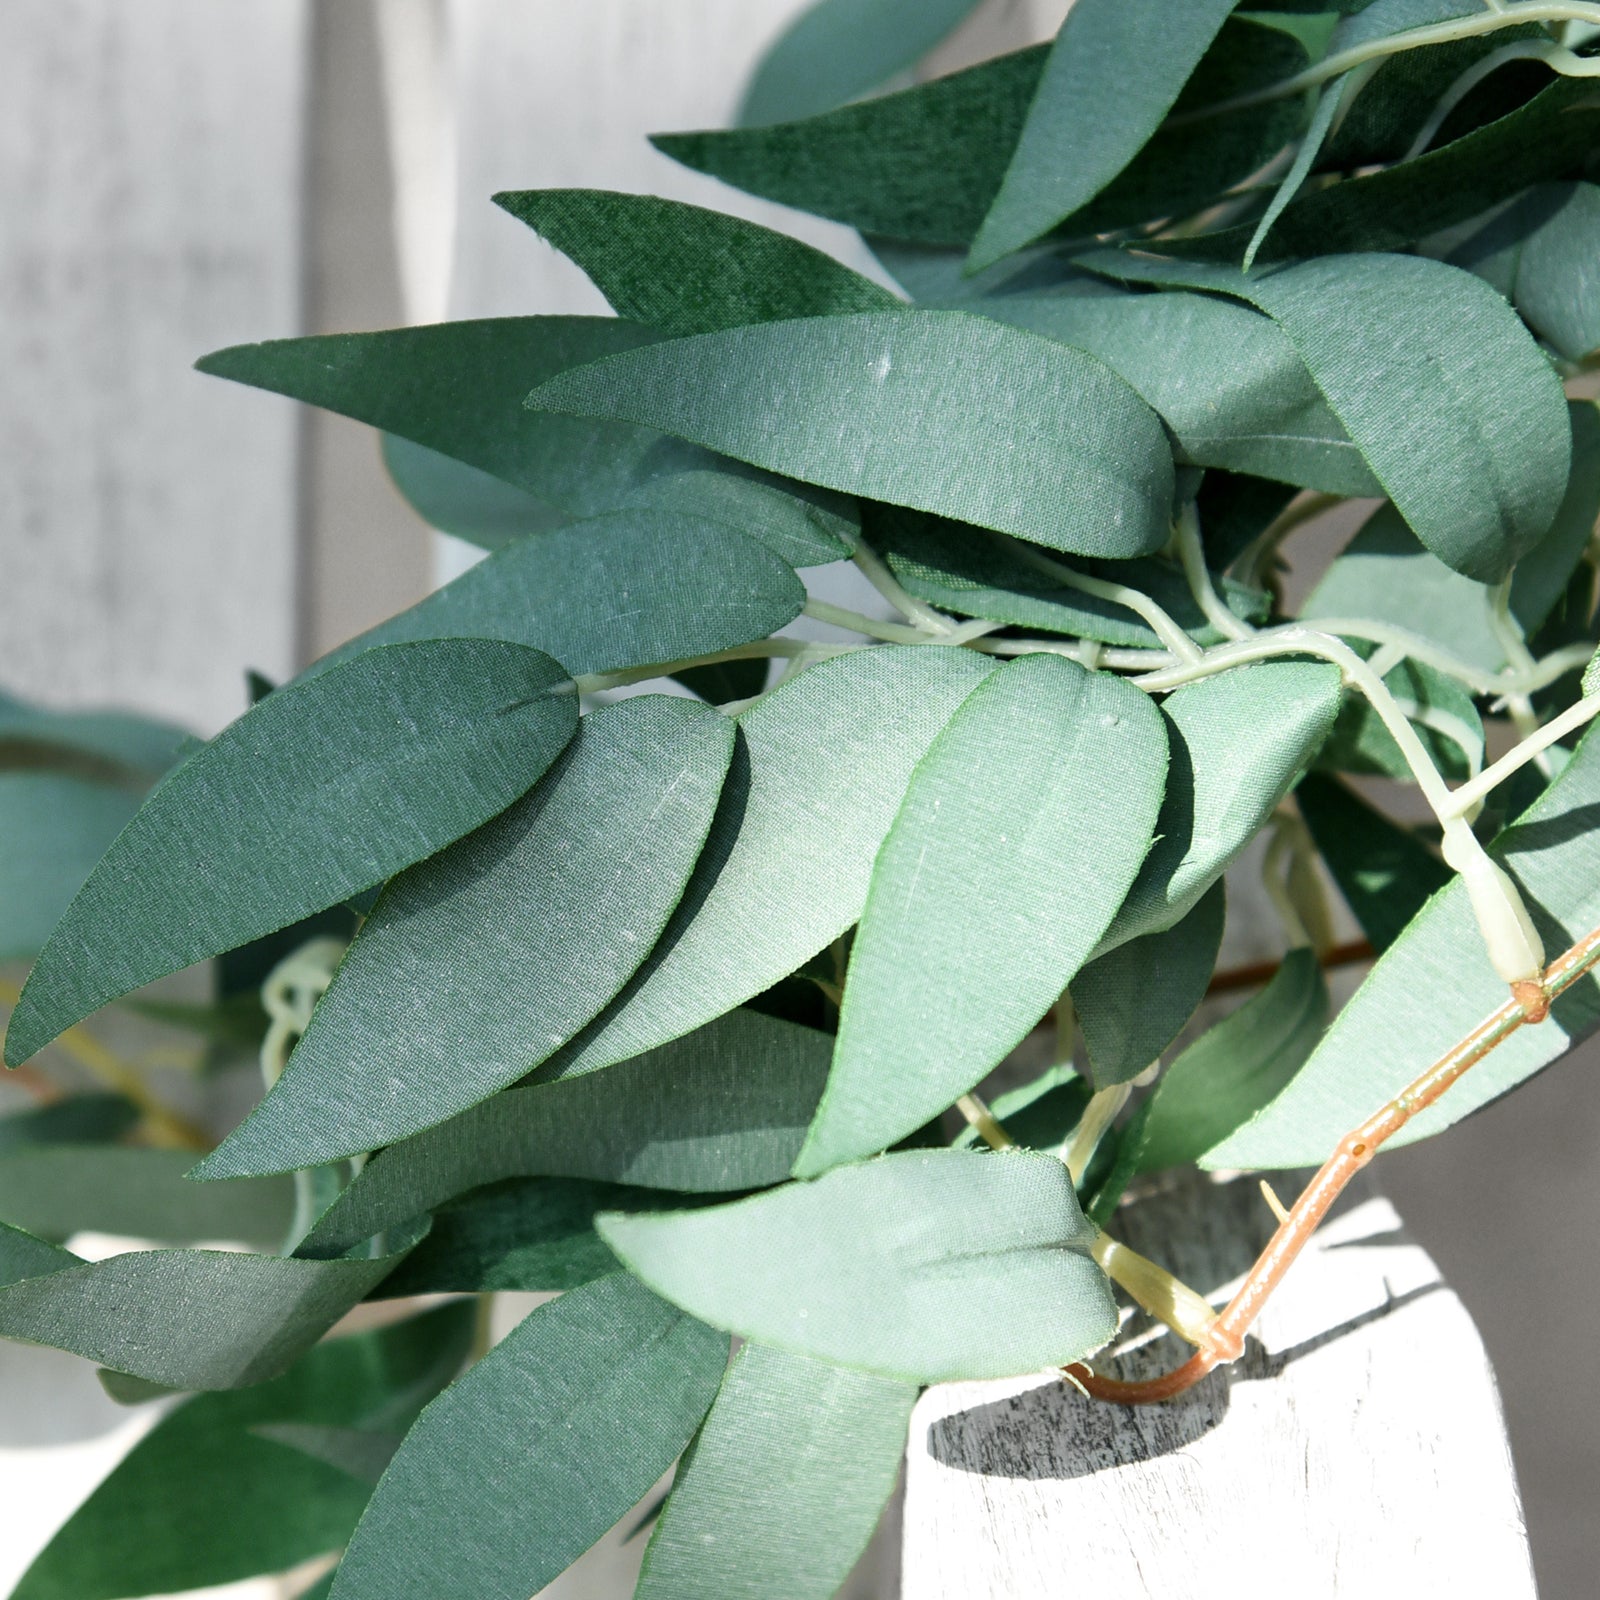 Artificial Eucalyptus Garland Fake Vine Plant With Leaves Faux Silver For  Wedding O